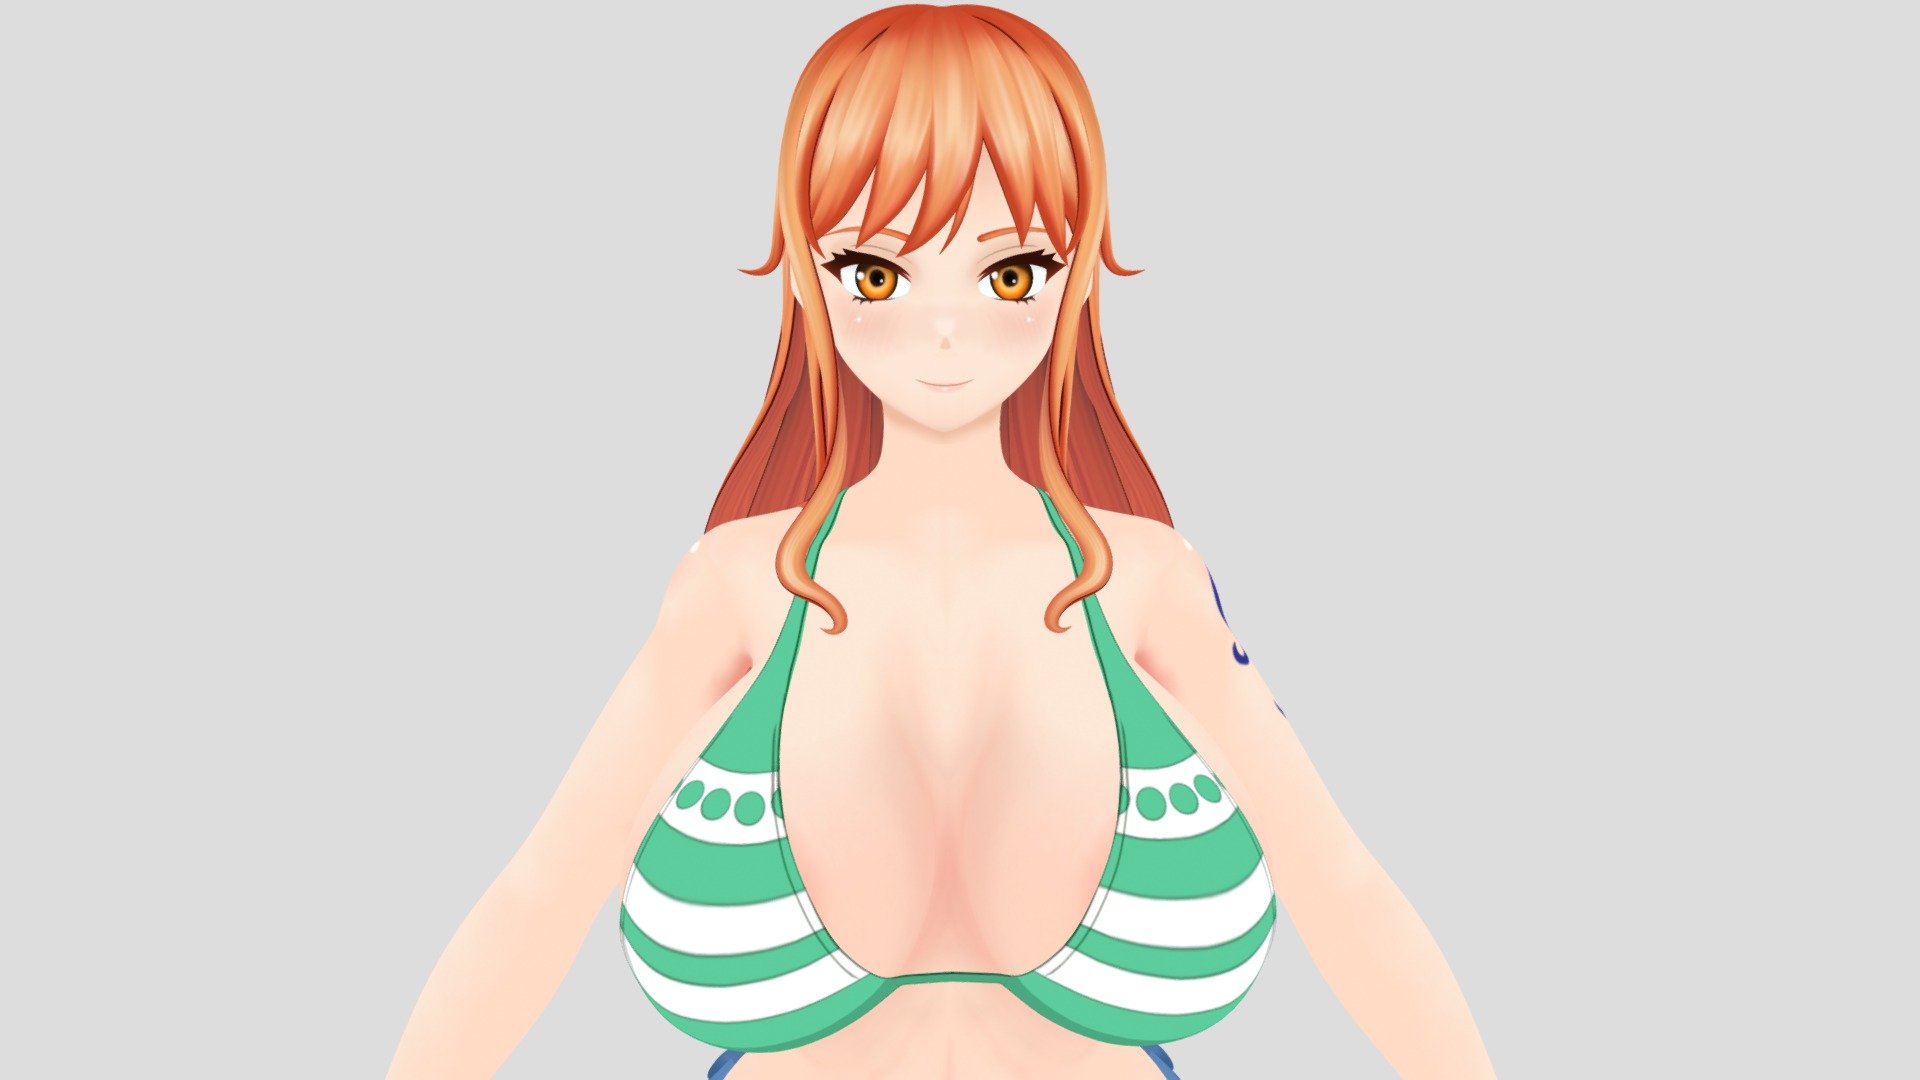 One Piece - Nami Model

All my networks here: https://yamisukebe.carrd.co/

Model available in Gumroad - Nami - 3D model by Yamisukebe 3d model